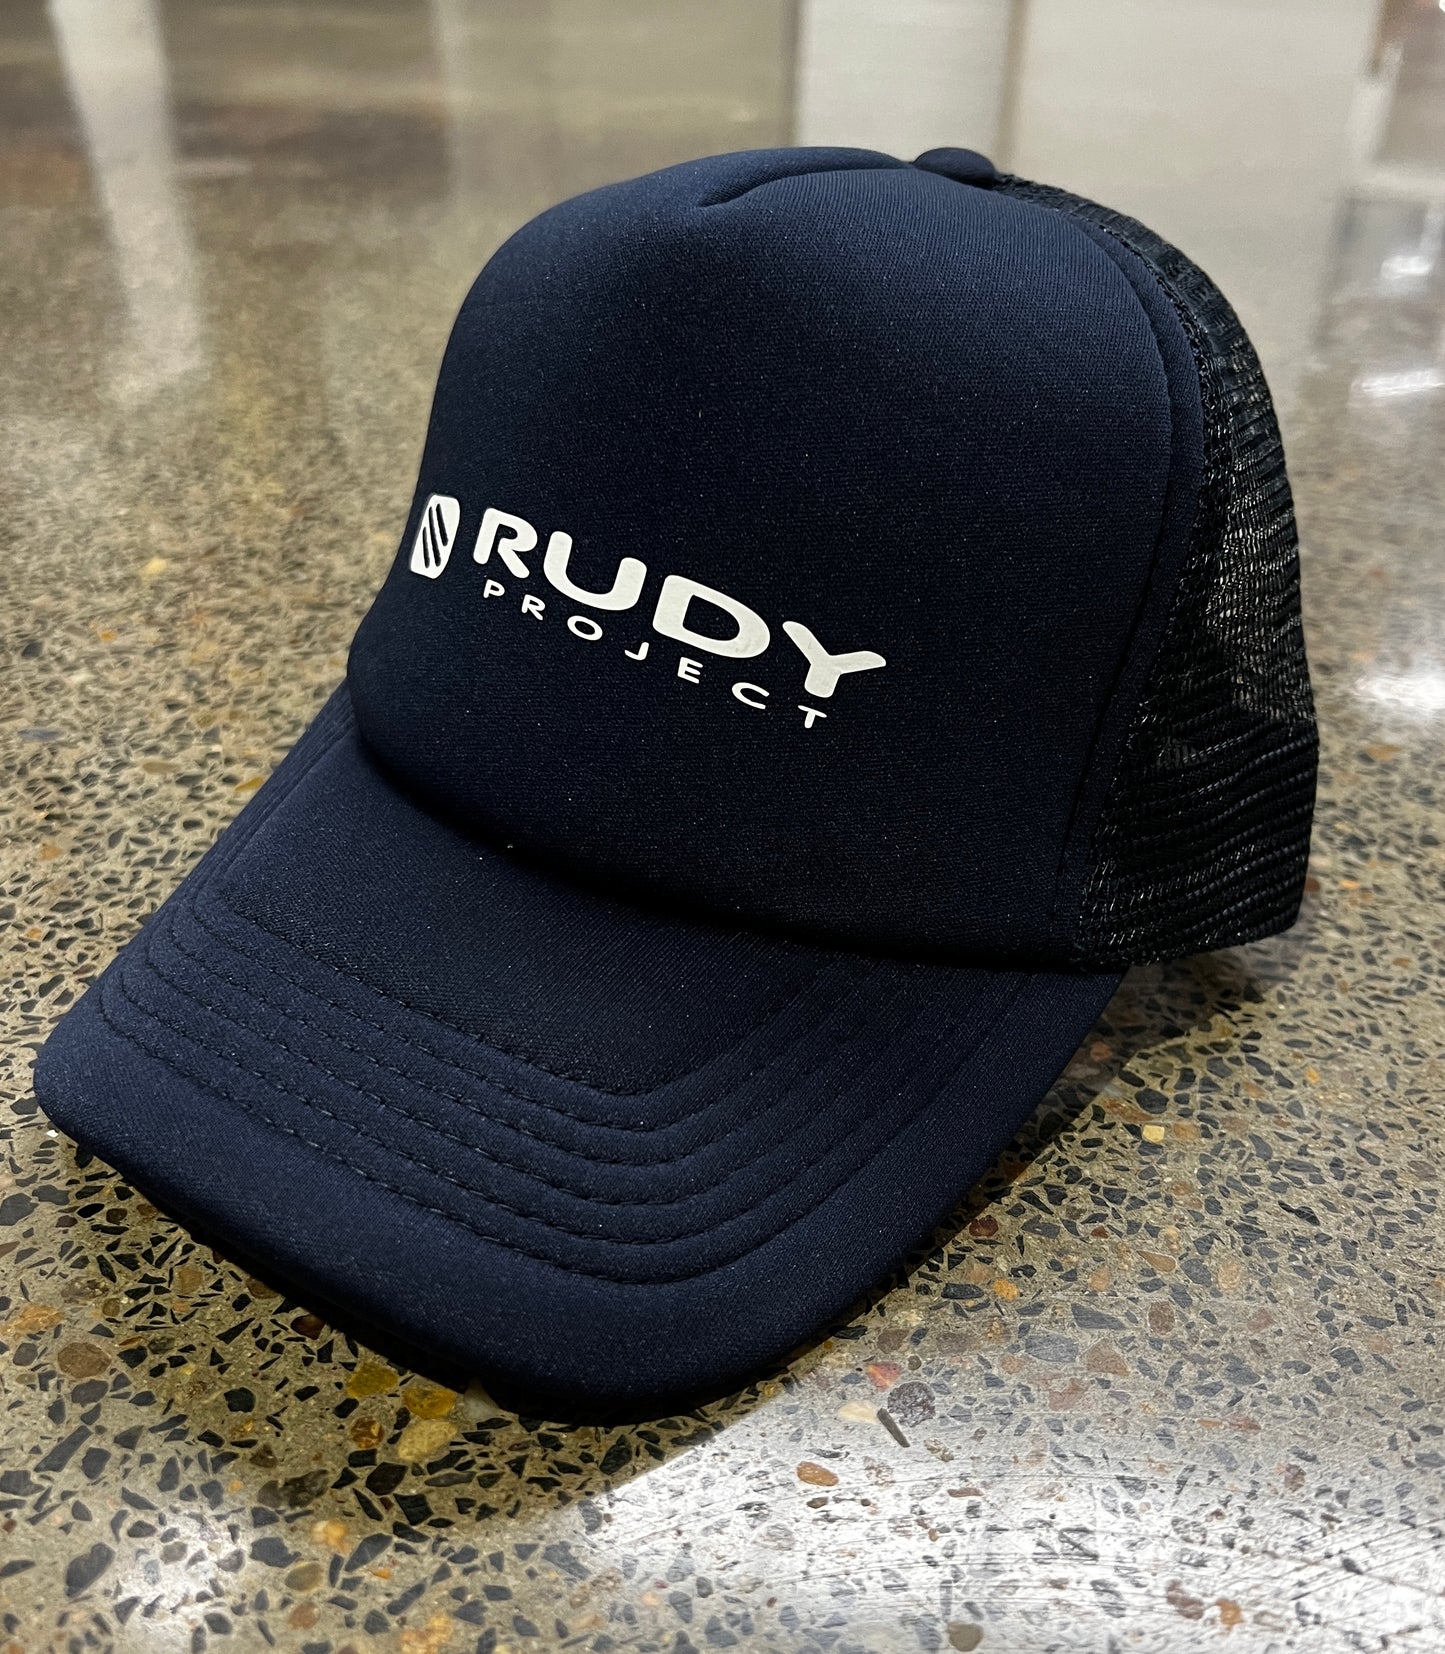 Rudy Project Branded Cap